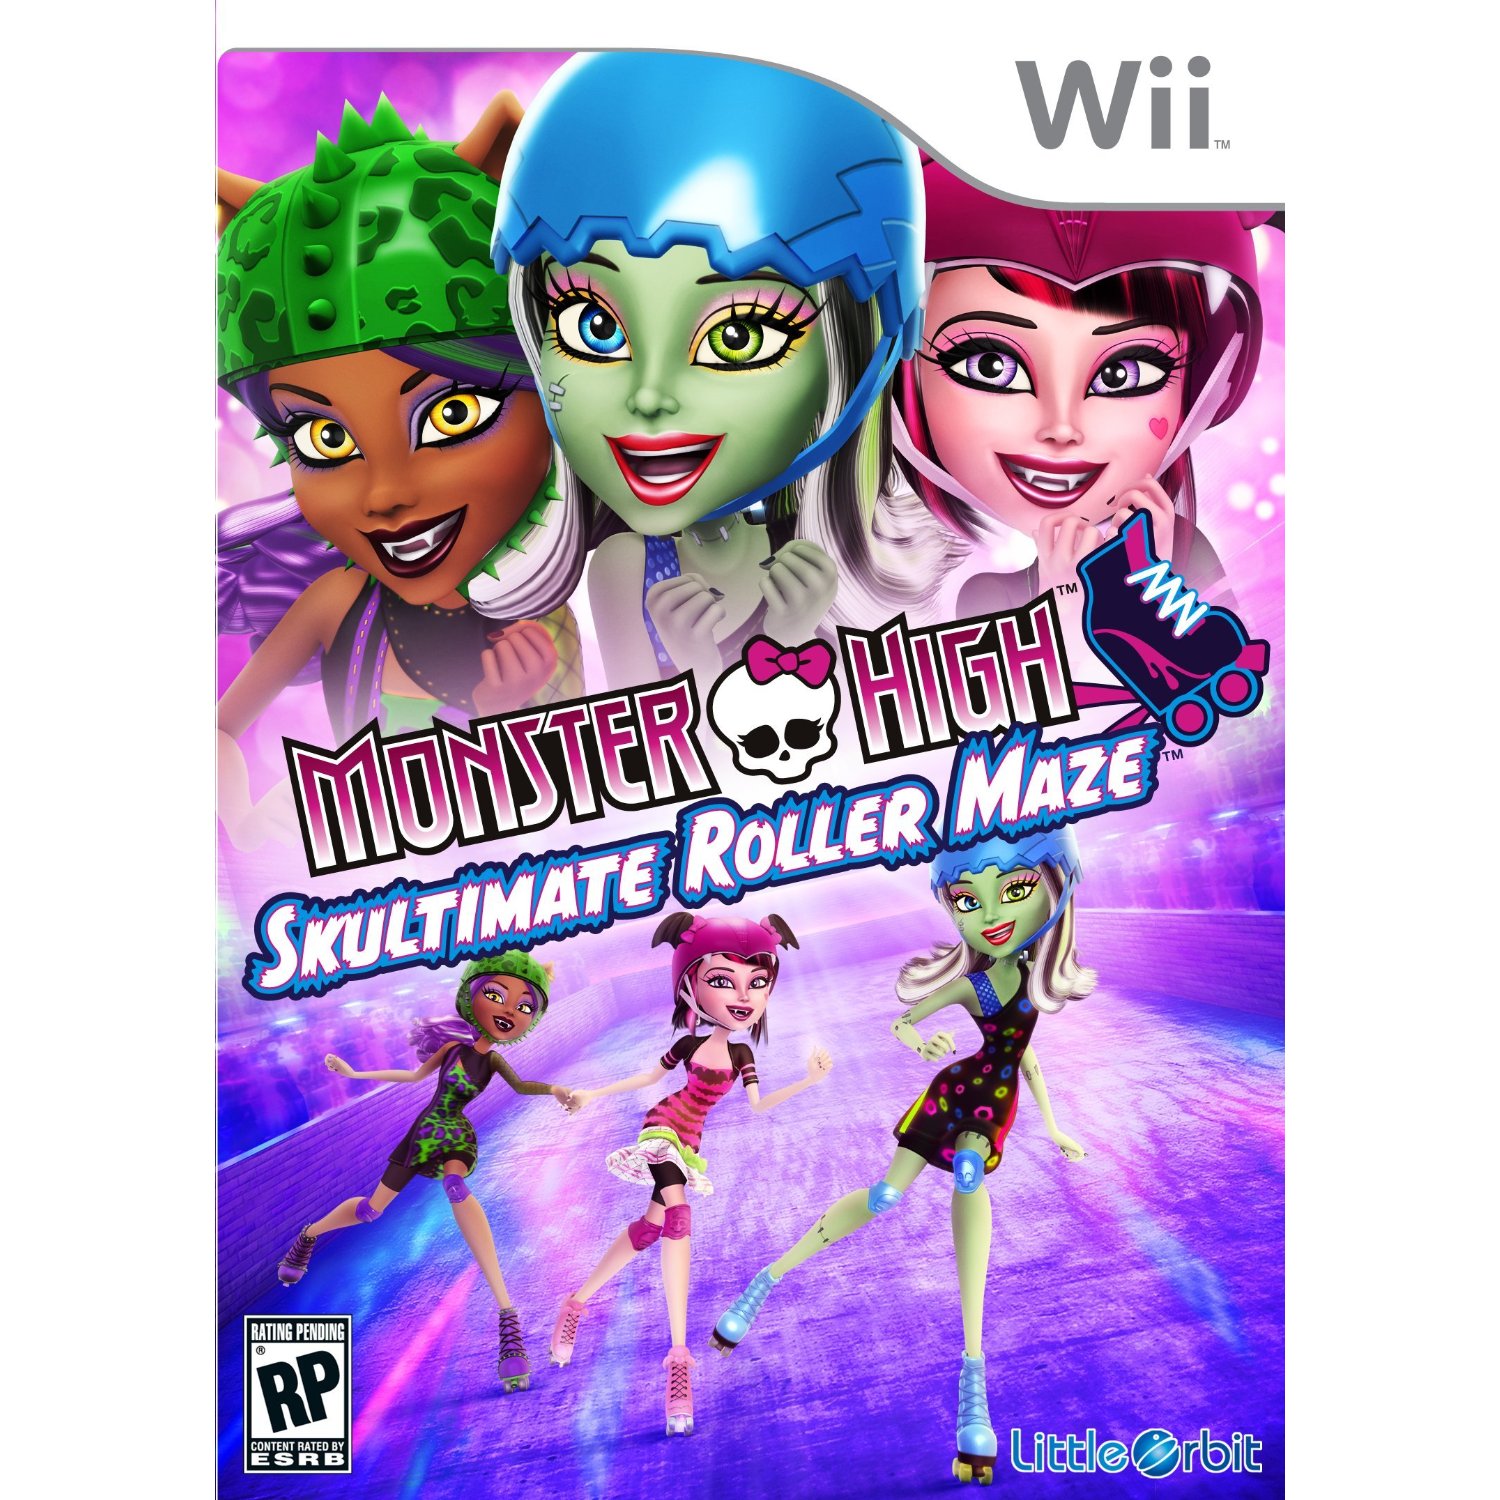 monster high 3ds games